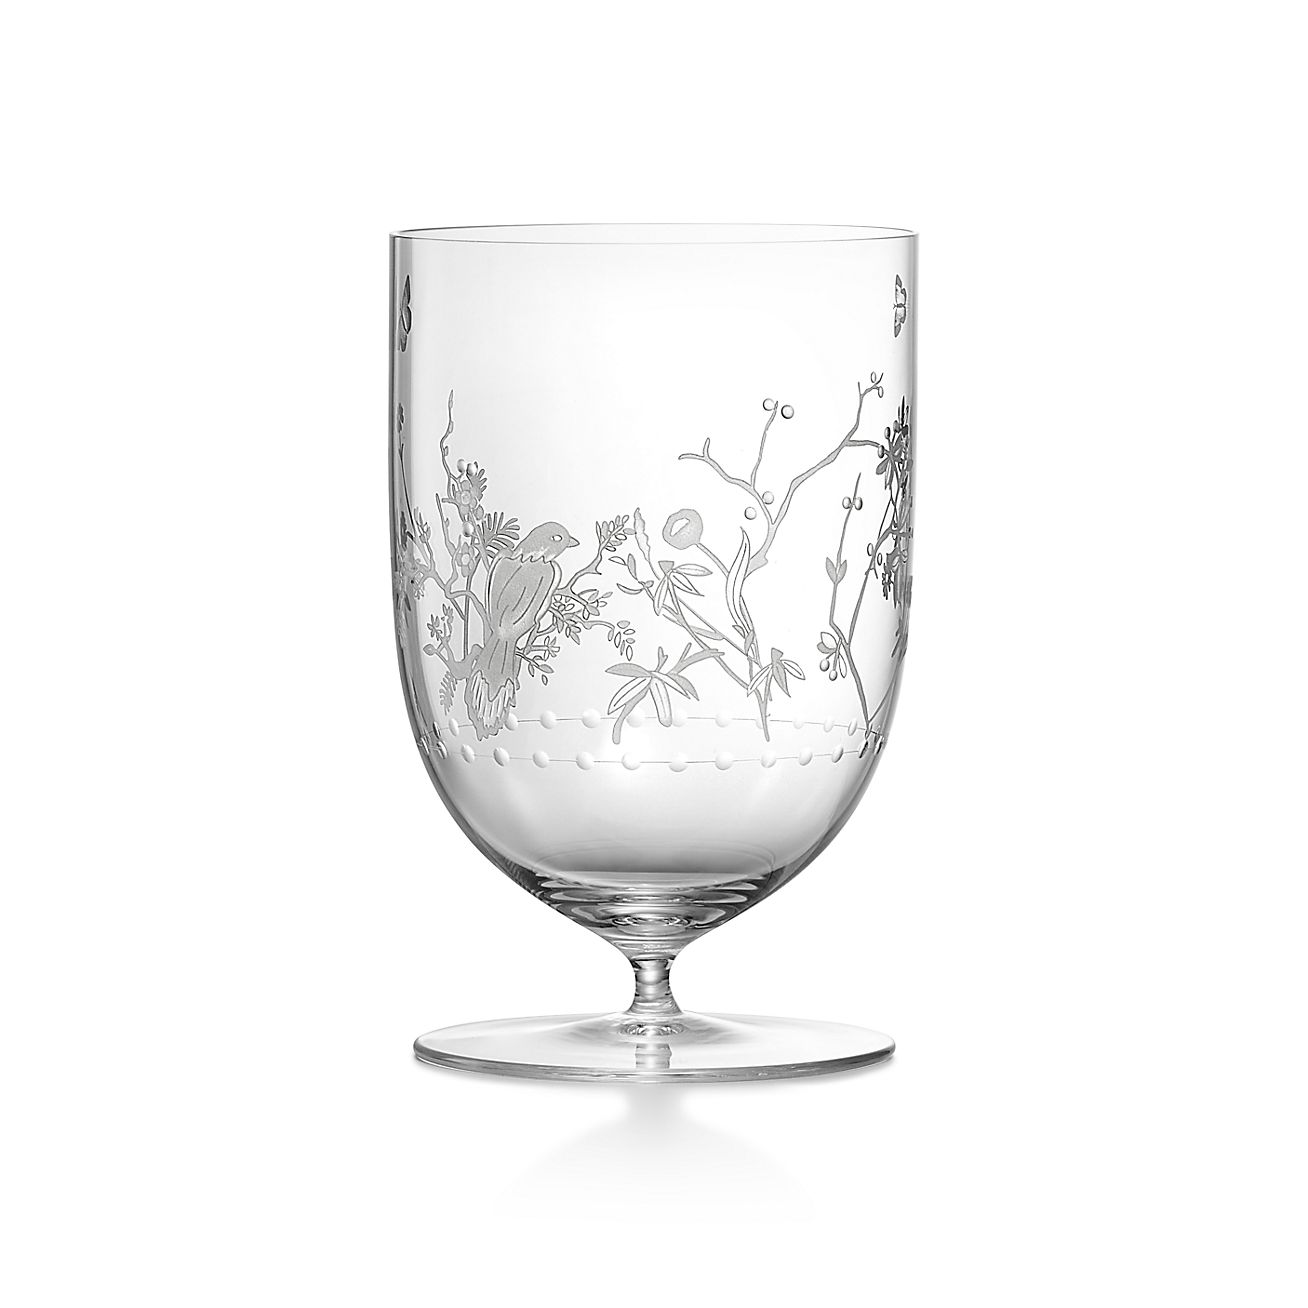 Tiffany Audubon Water Glass in Hand-etched Glass